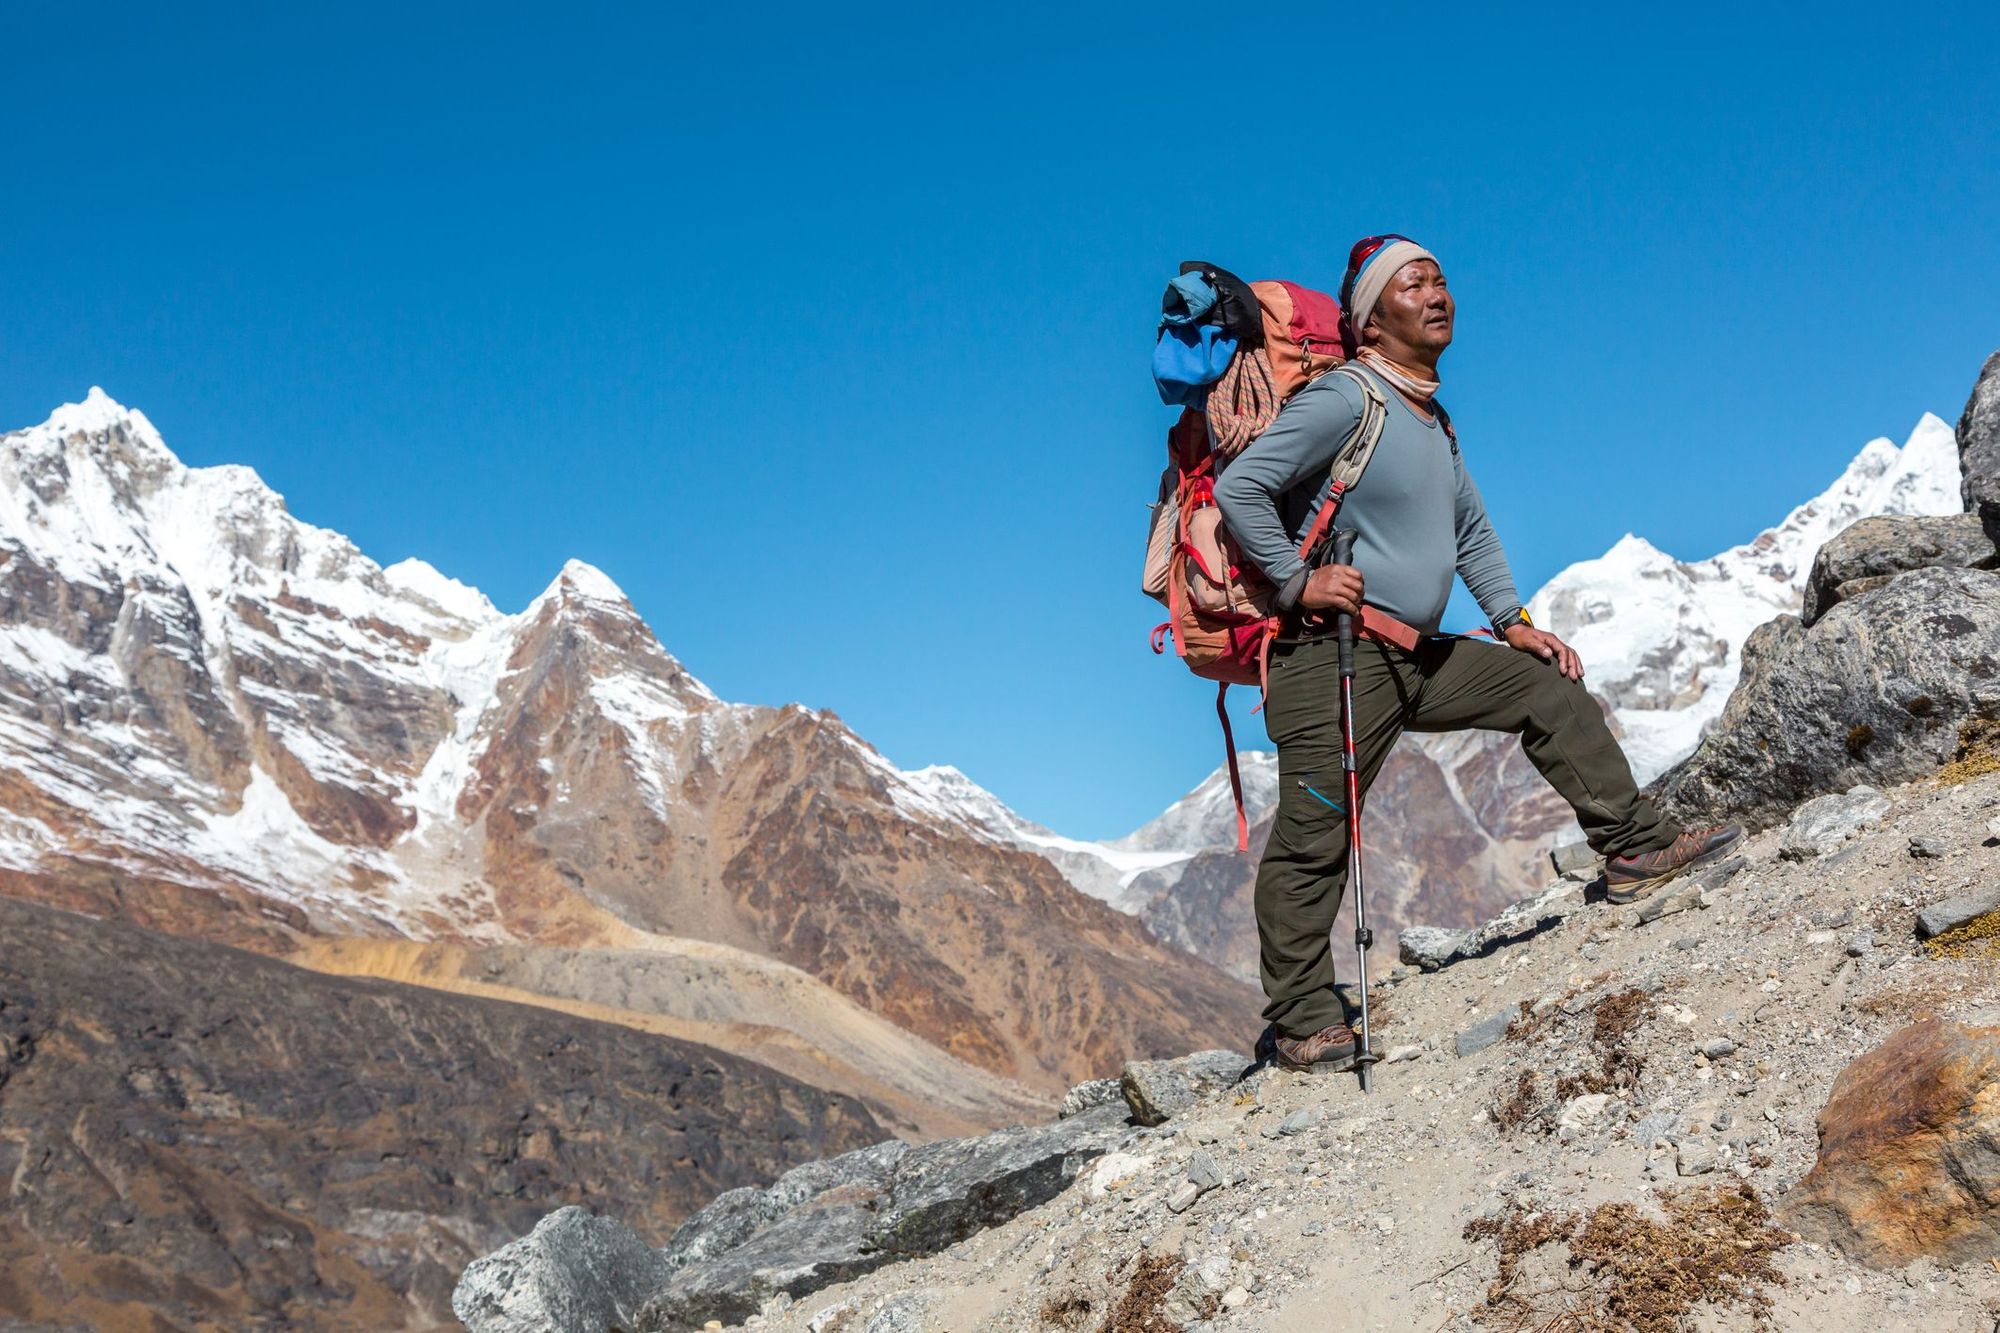 A Nepalese mountain guide poses in the Himalayas.